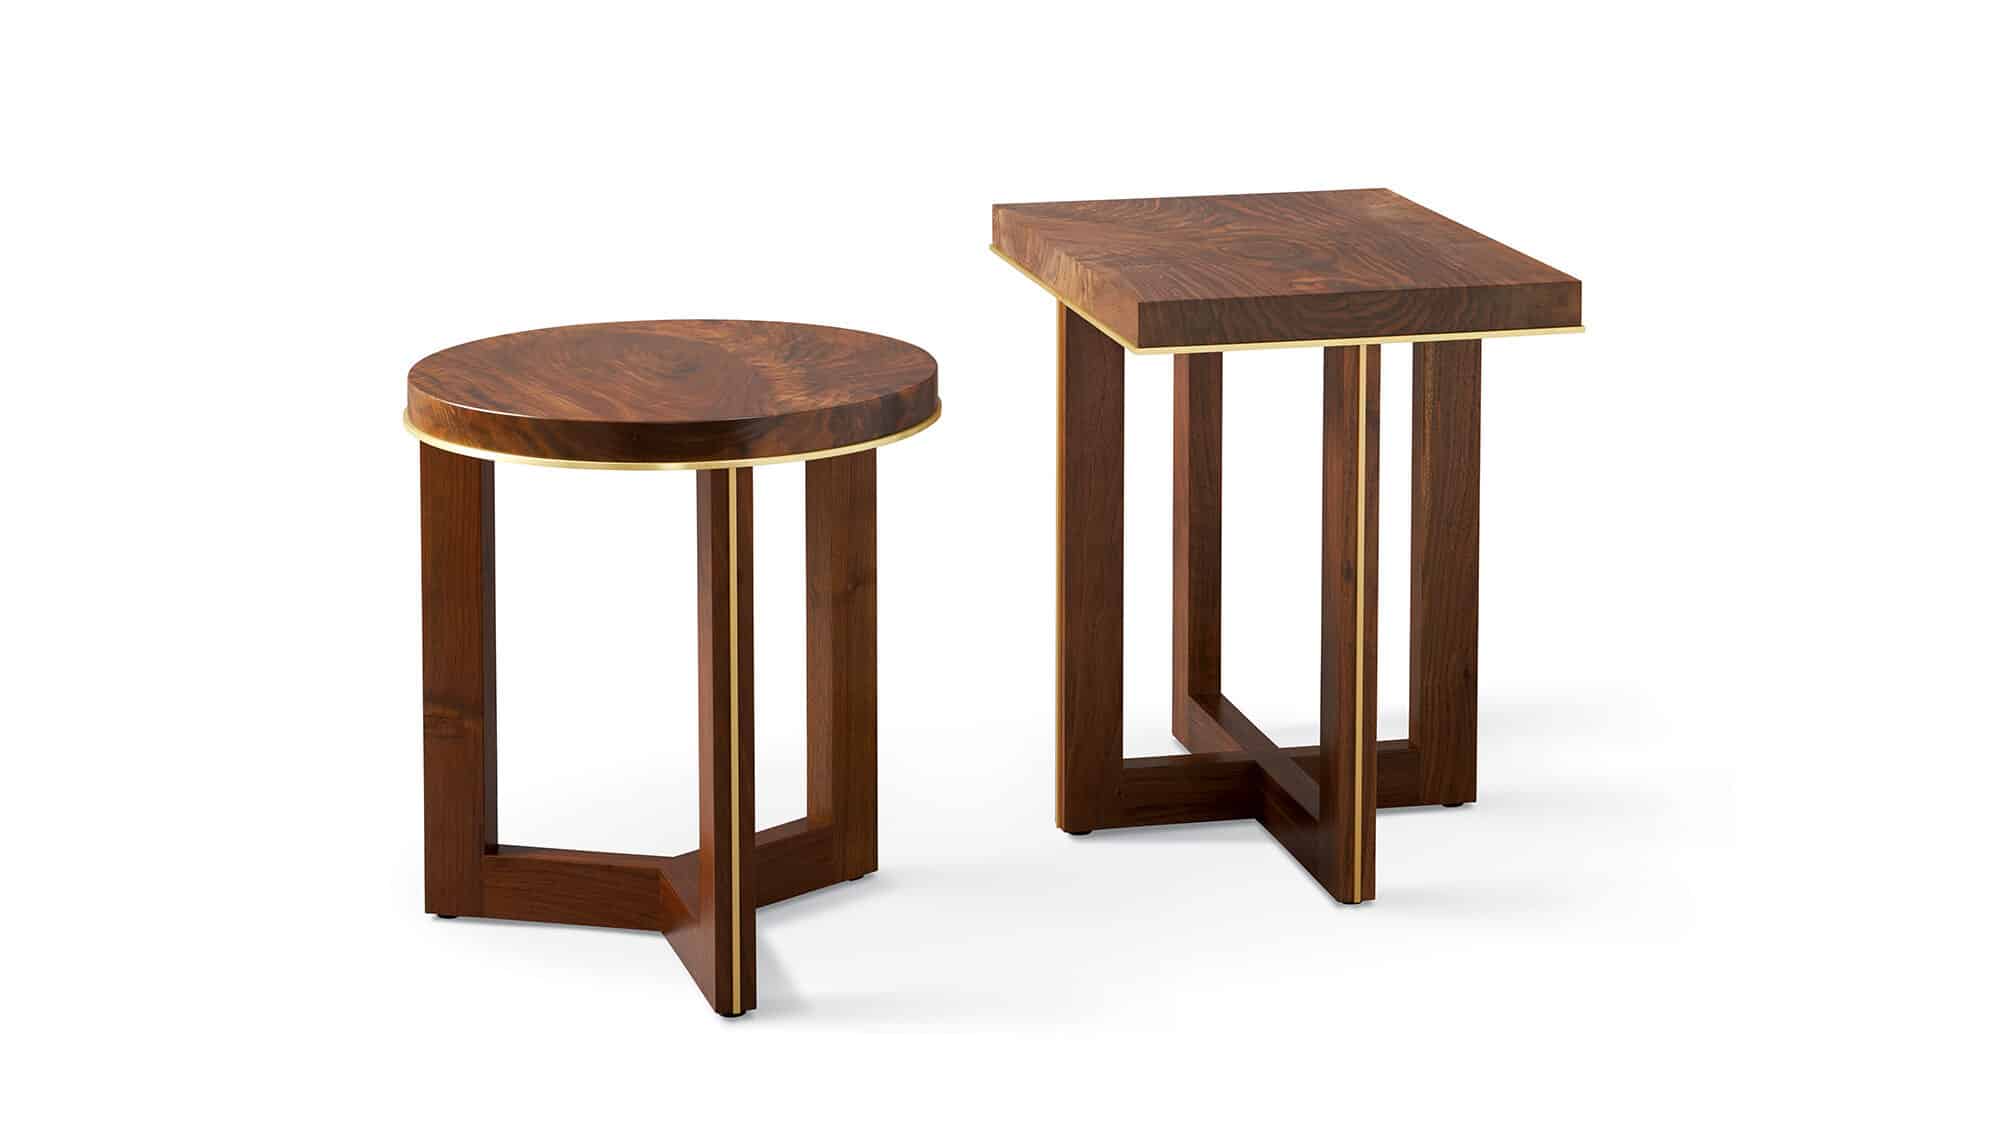 The Fretwork Side Tables by Altura Furniture